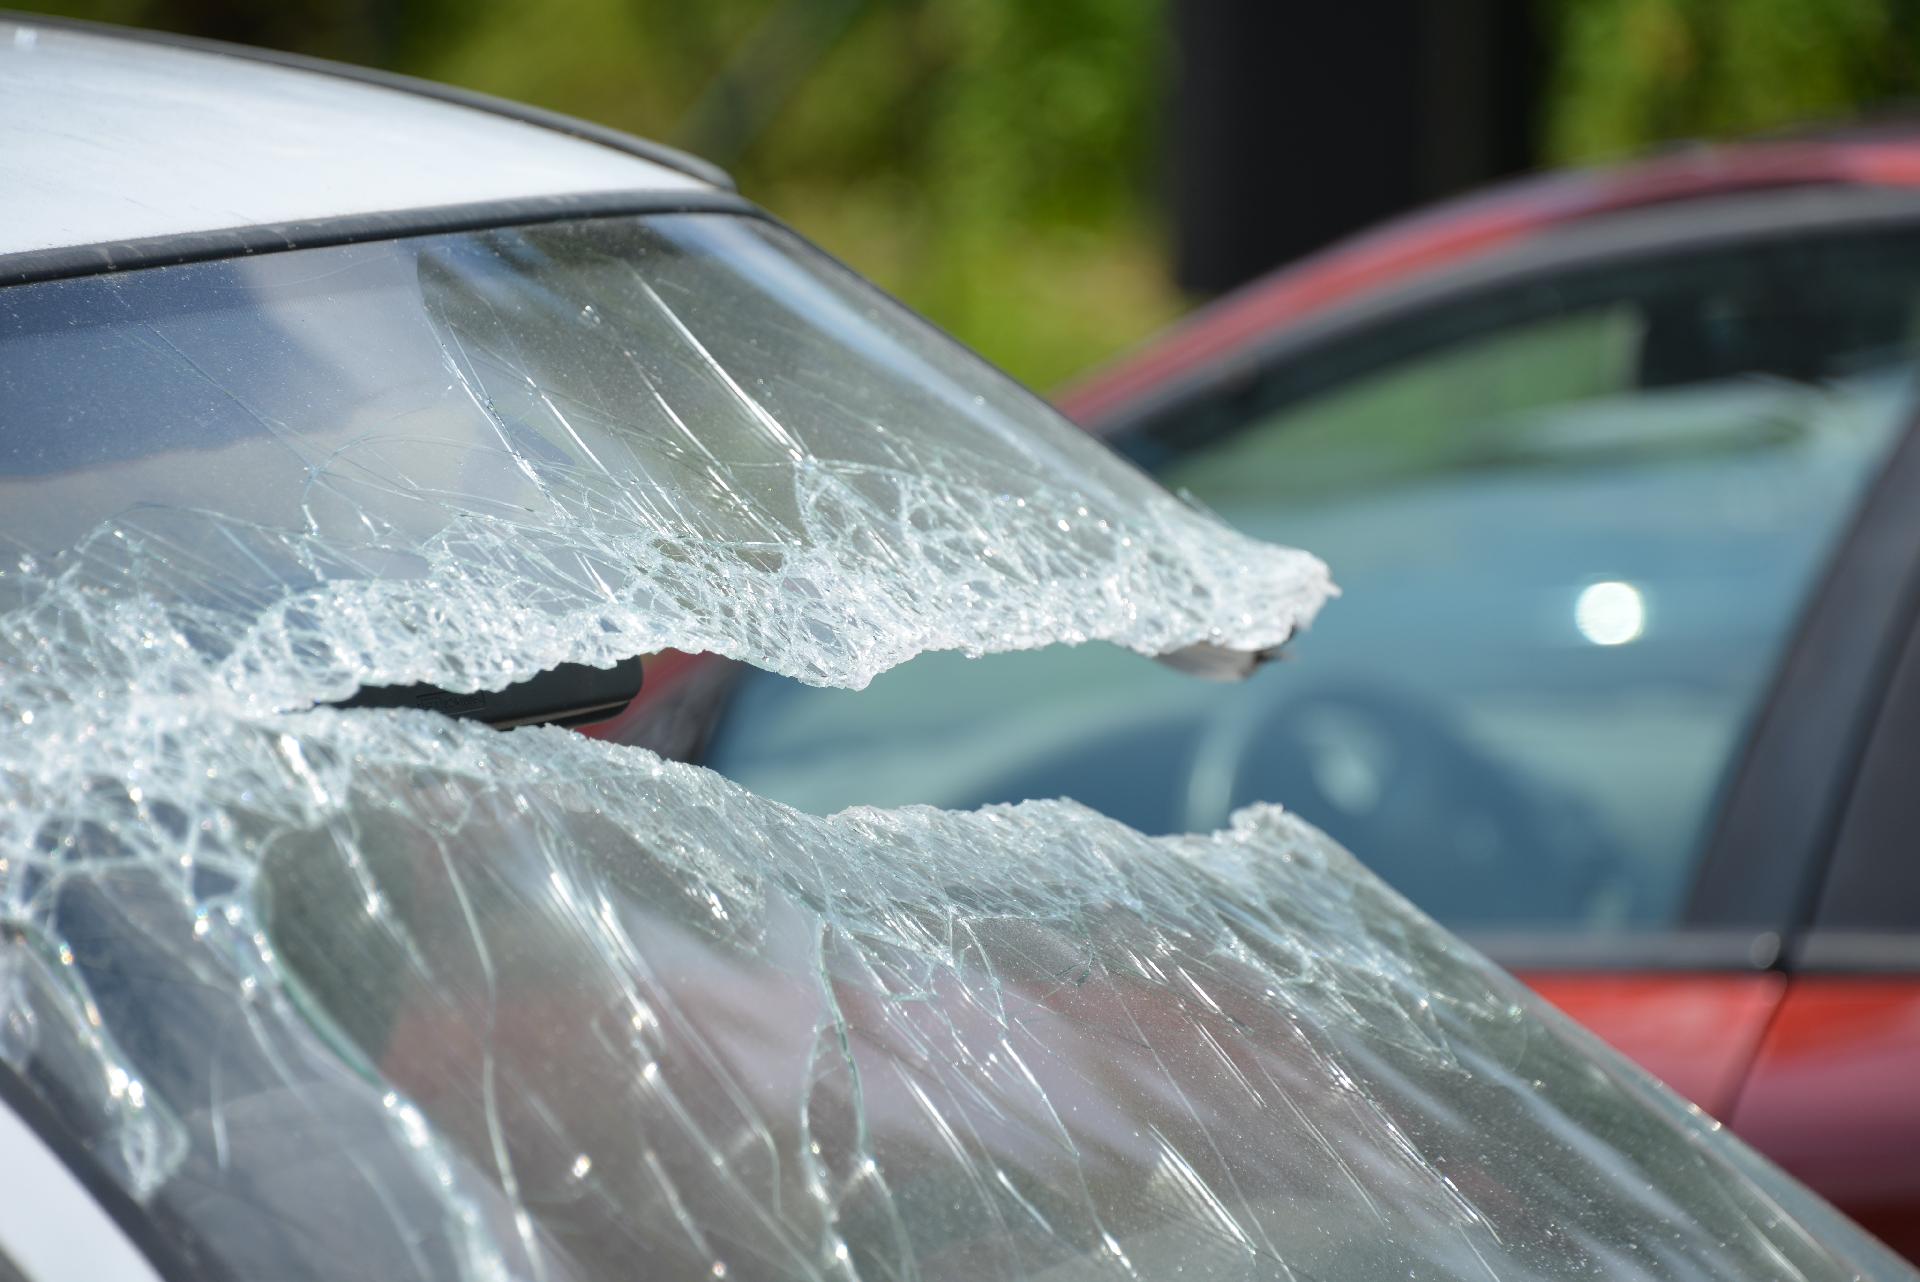 Hire a car accident lawyer in Baton Rouge!